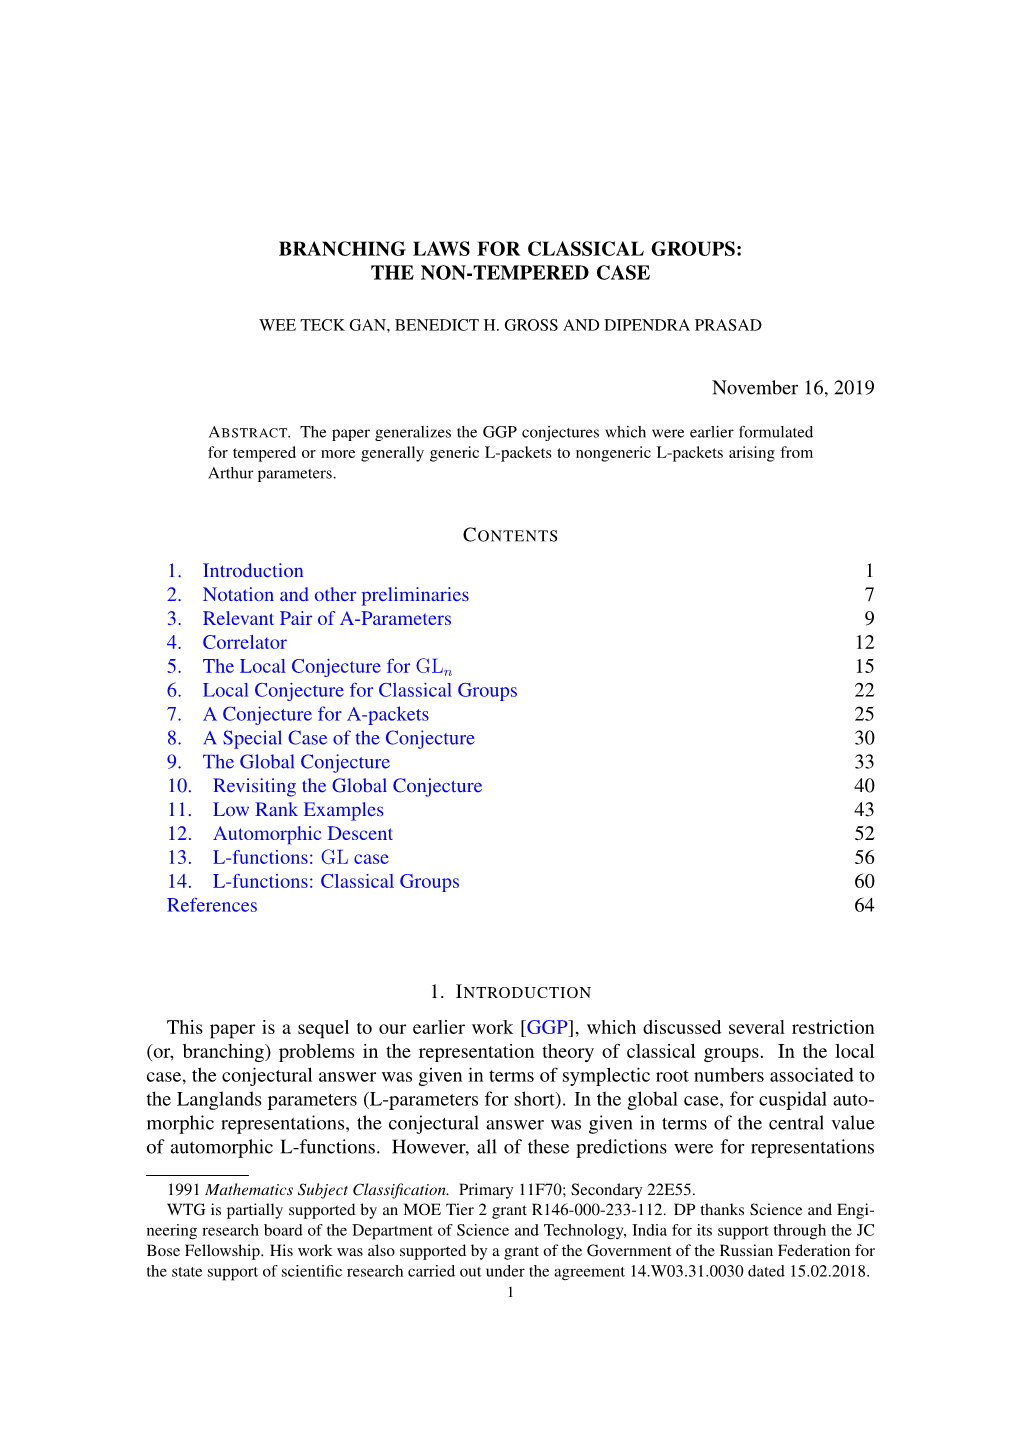 Branching Laws for Classical Groups: the Non-Tempered Case